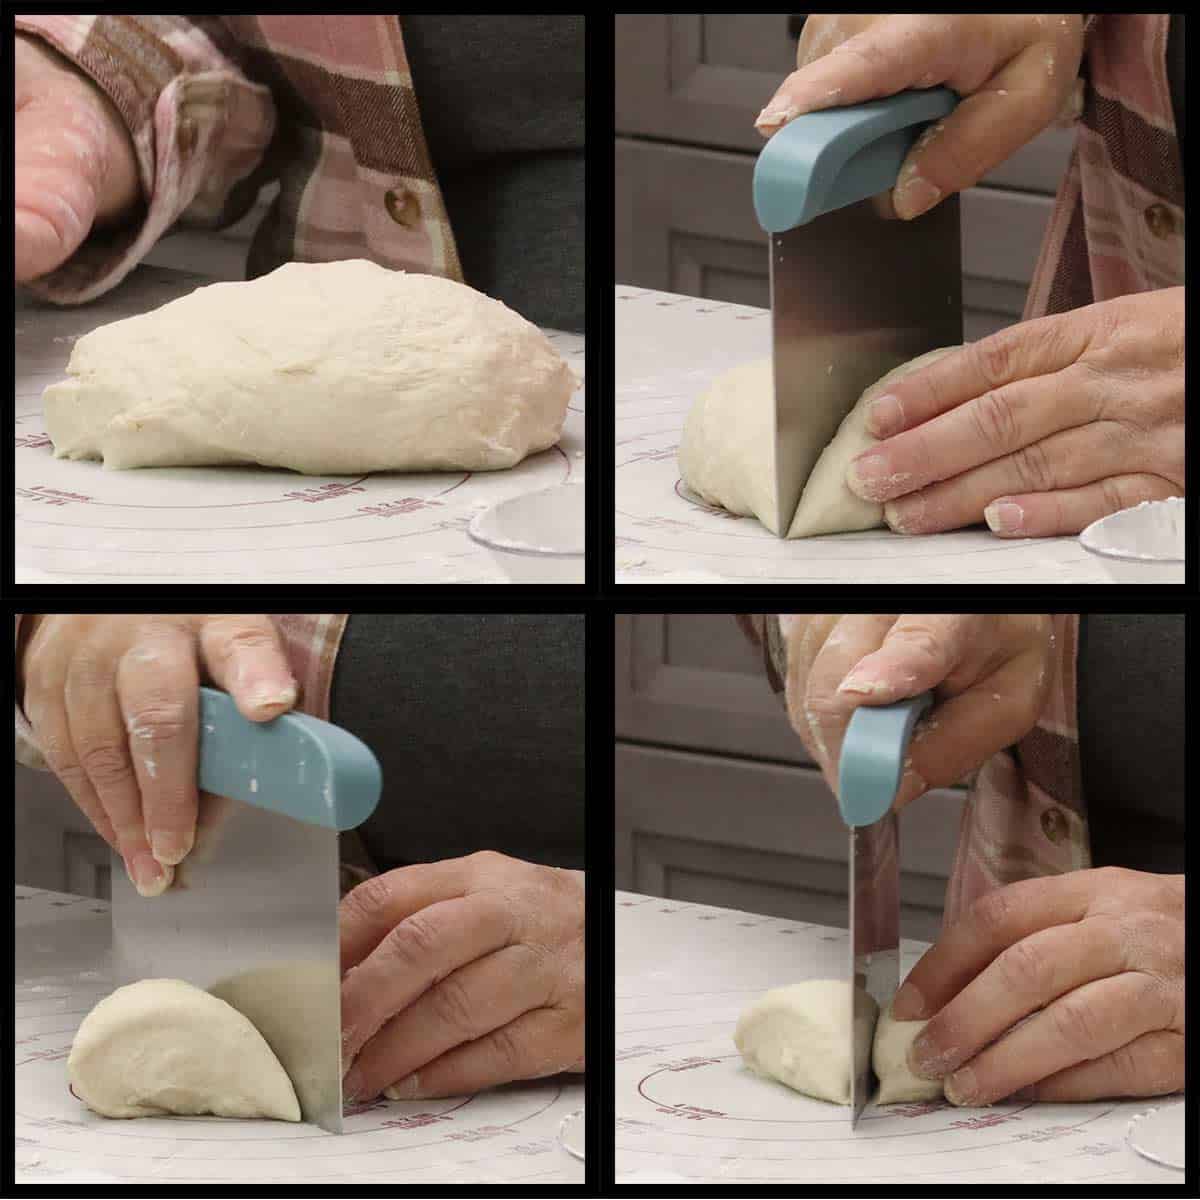 separating dough ball into smaller sections for rolling the ropes.